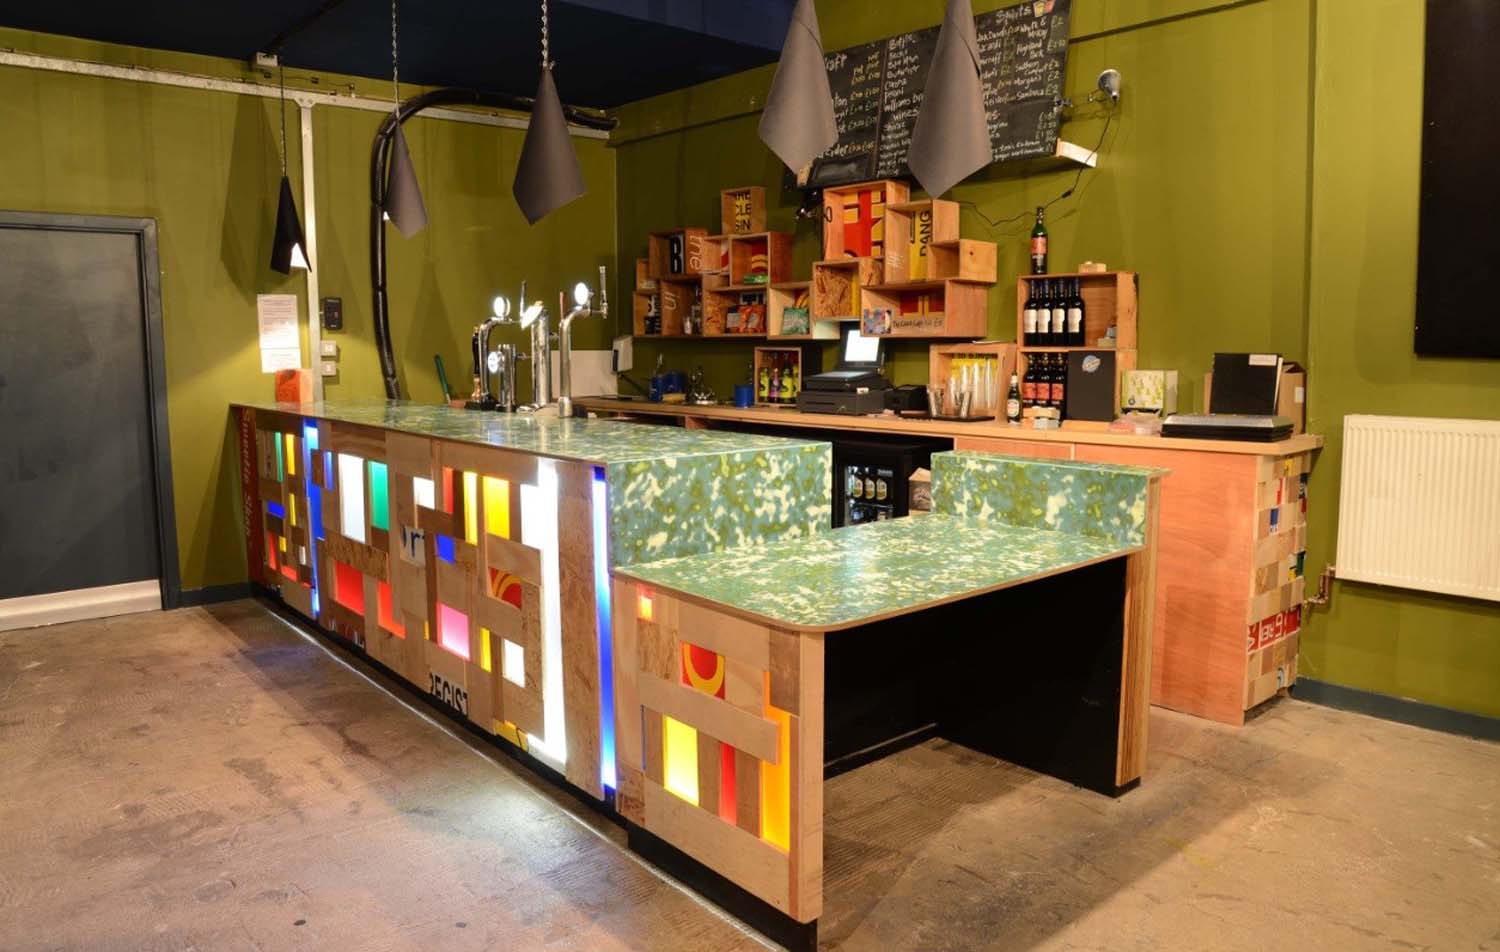 The Glad Cafe bar station's front cover, made out off cut out timber and brightly coloured plastic offcuts. The plastic is lit up by lights.